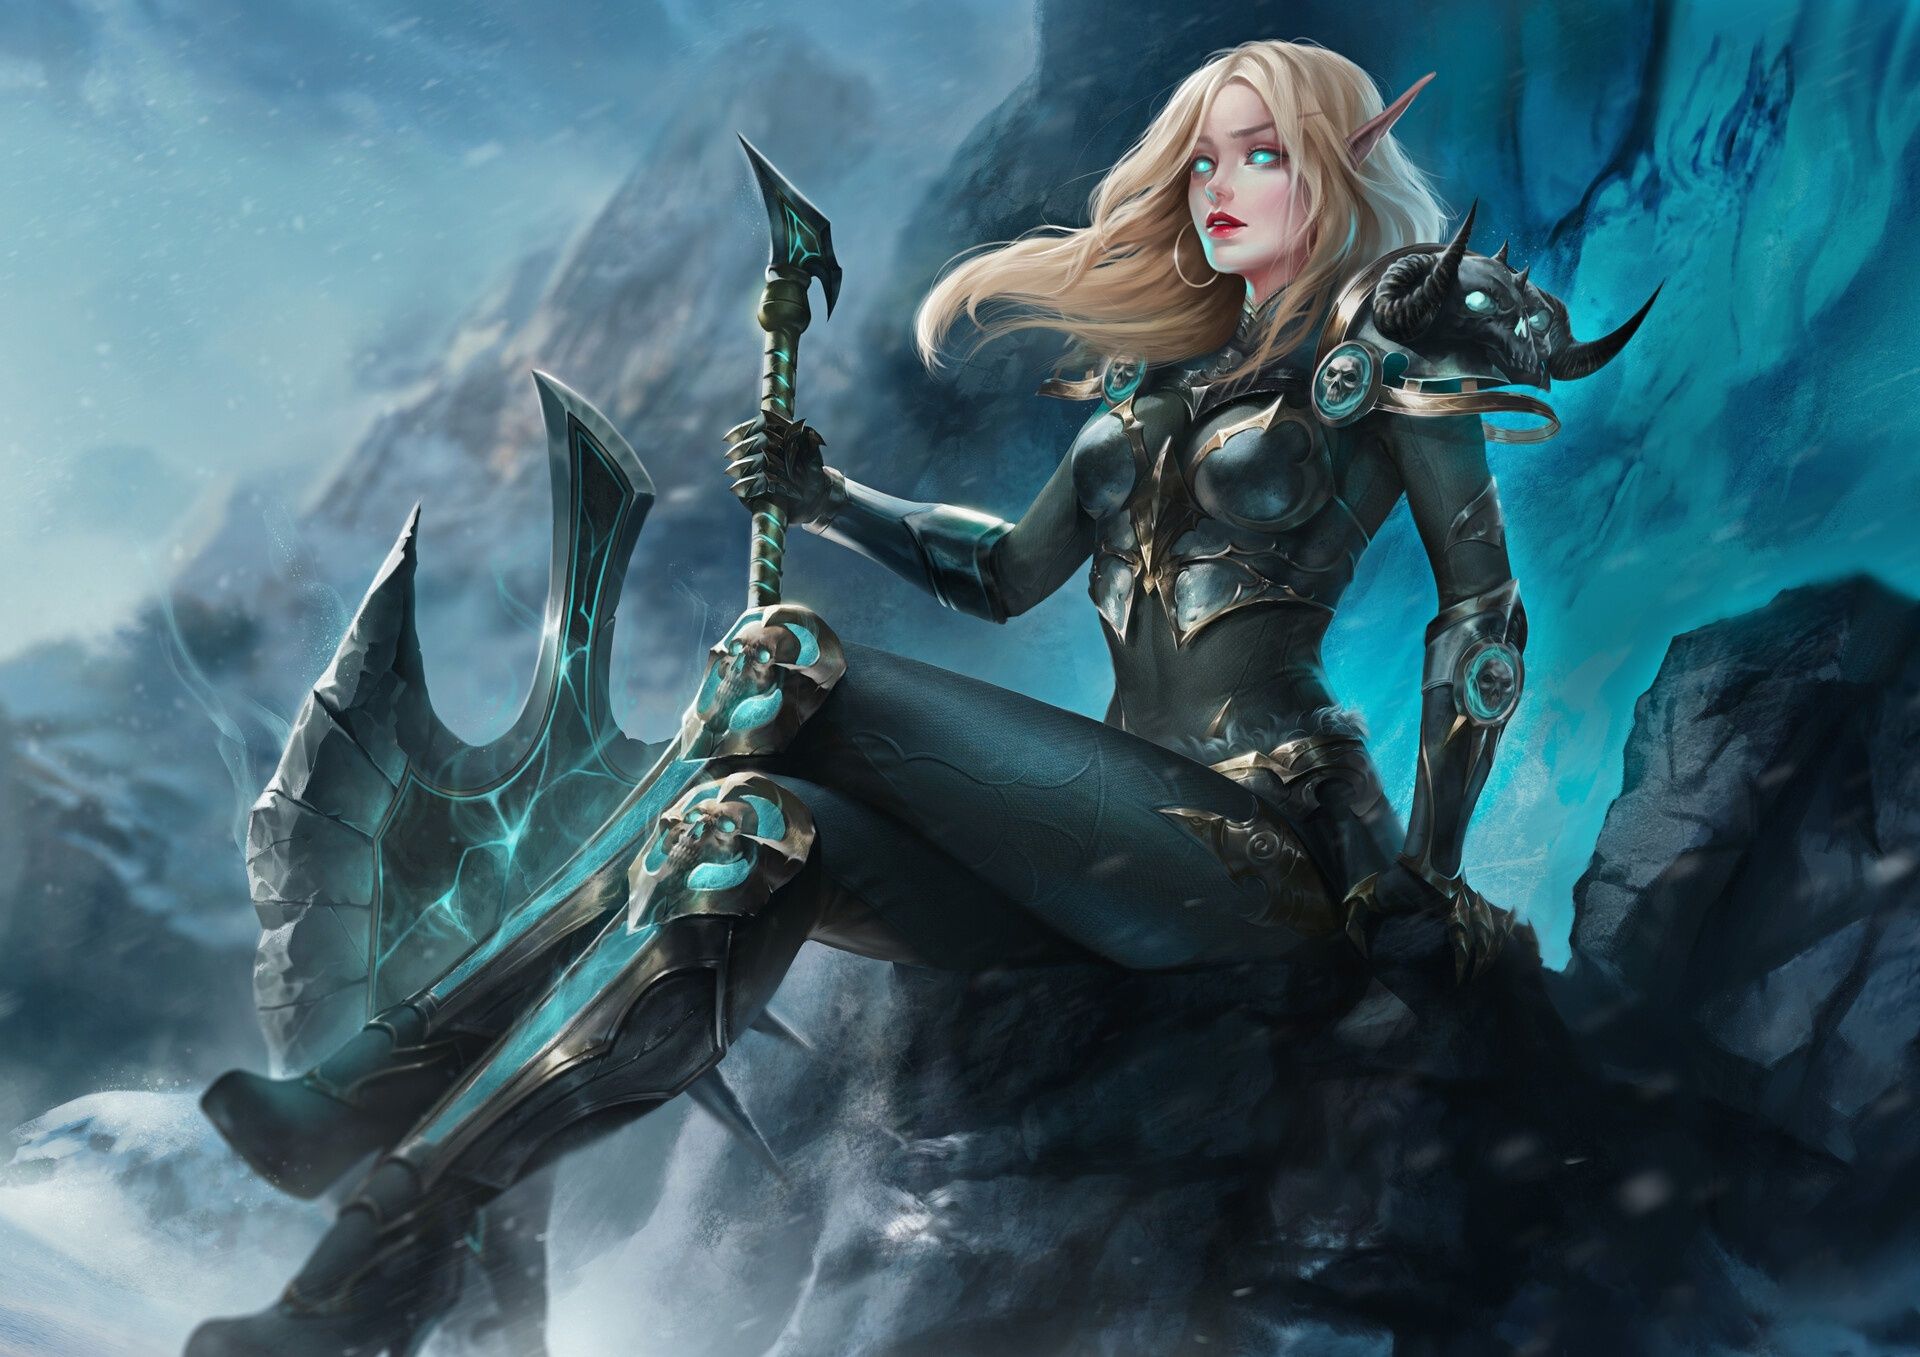 Elf Woman Warrior Wallpaper, HD Games 4K Wallpaper, Image, Photo and Background